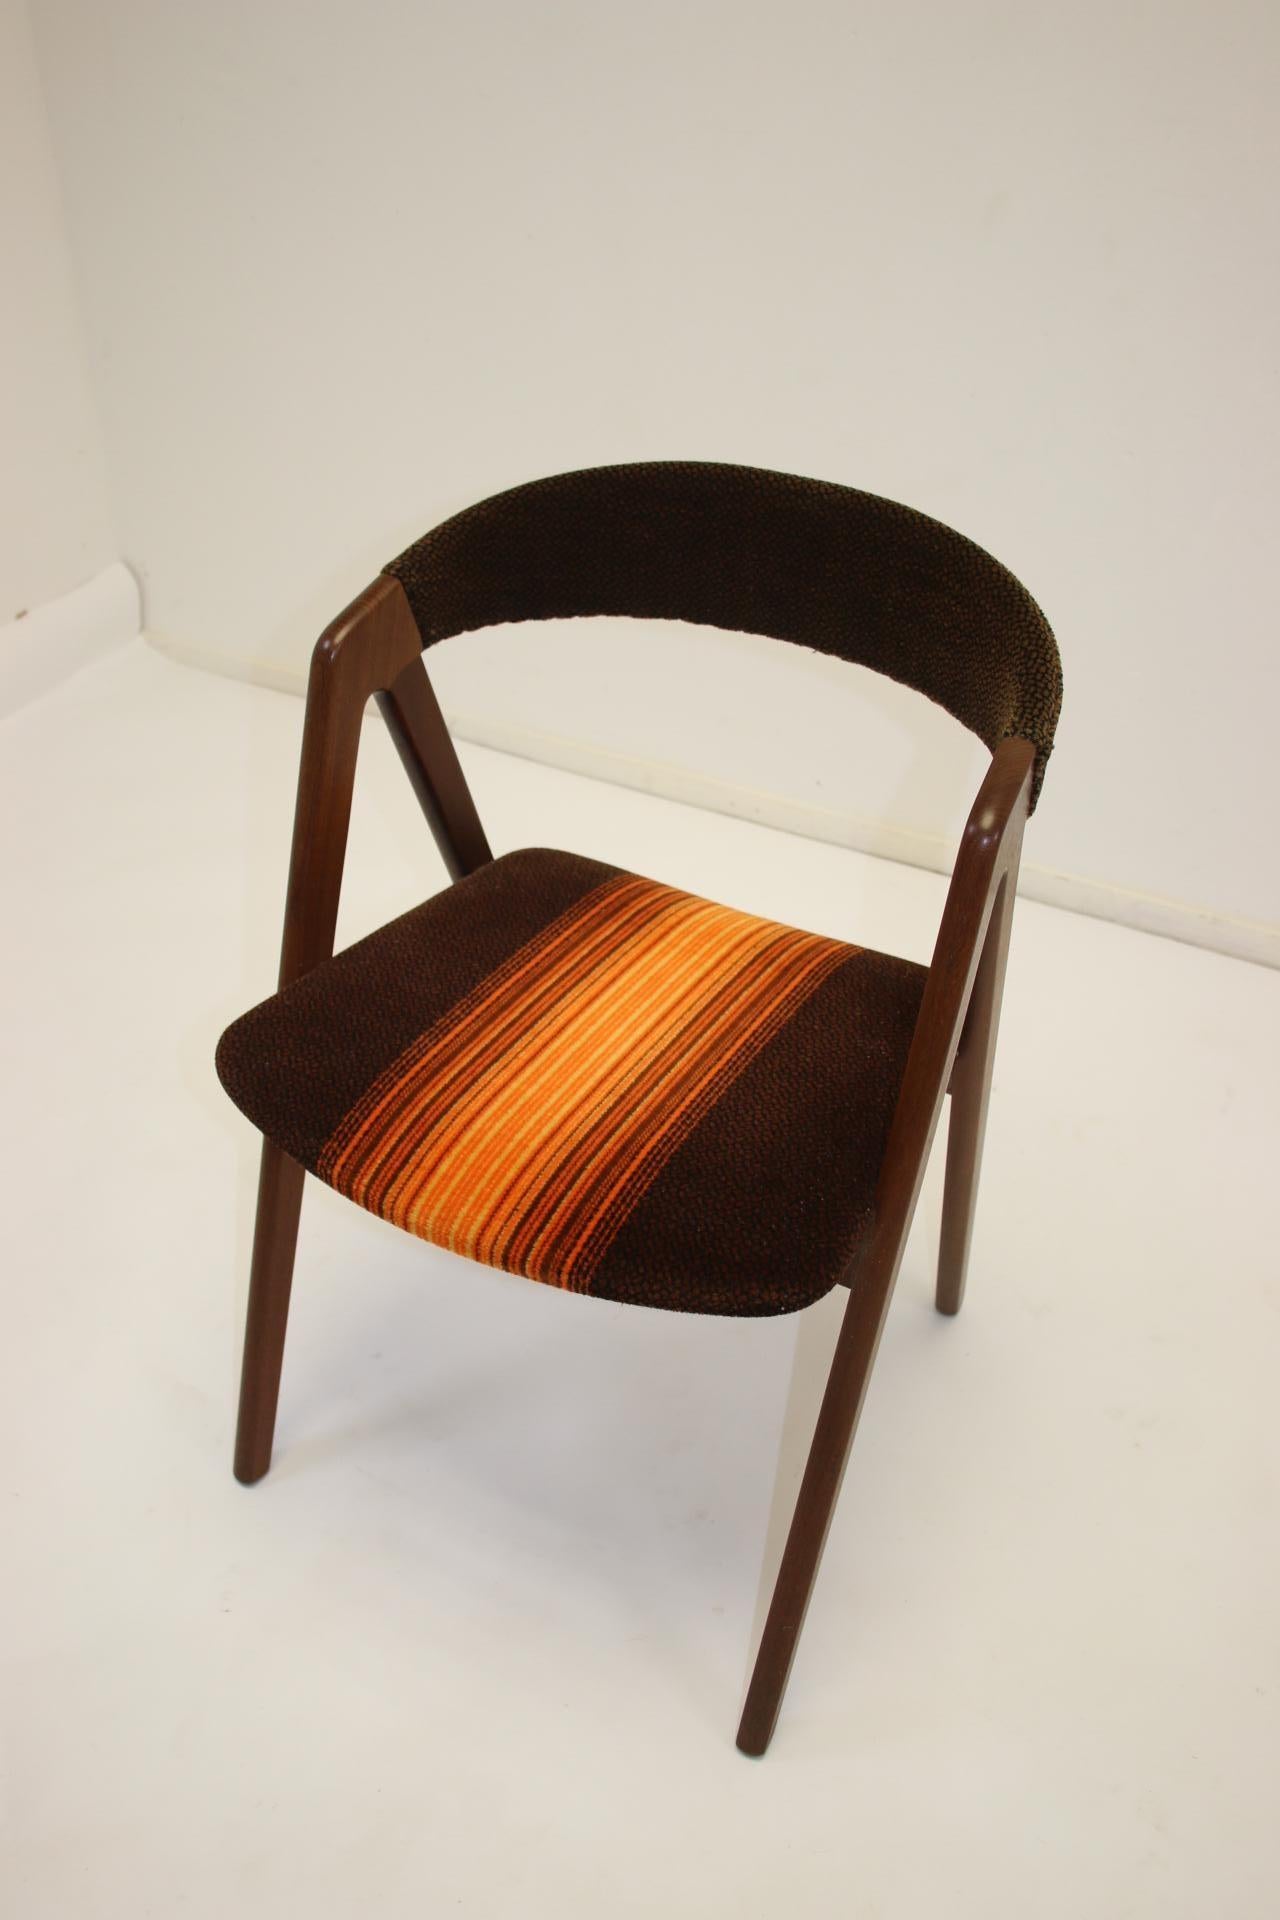 Office chair danish design with brown/orange fabric


This is a beautiful office chair with orange/brown fabric with a teak wood frame.

This chair also has a nice back seat.